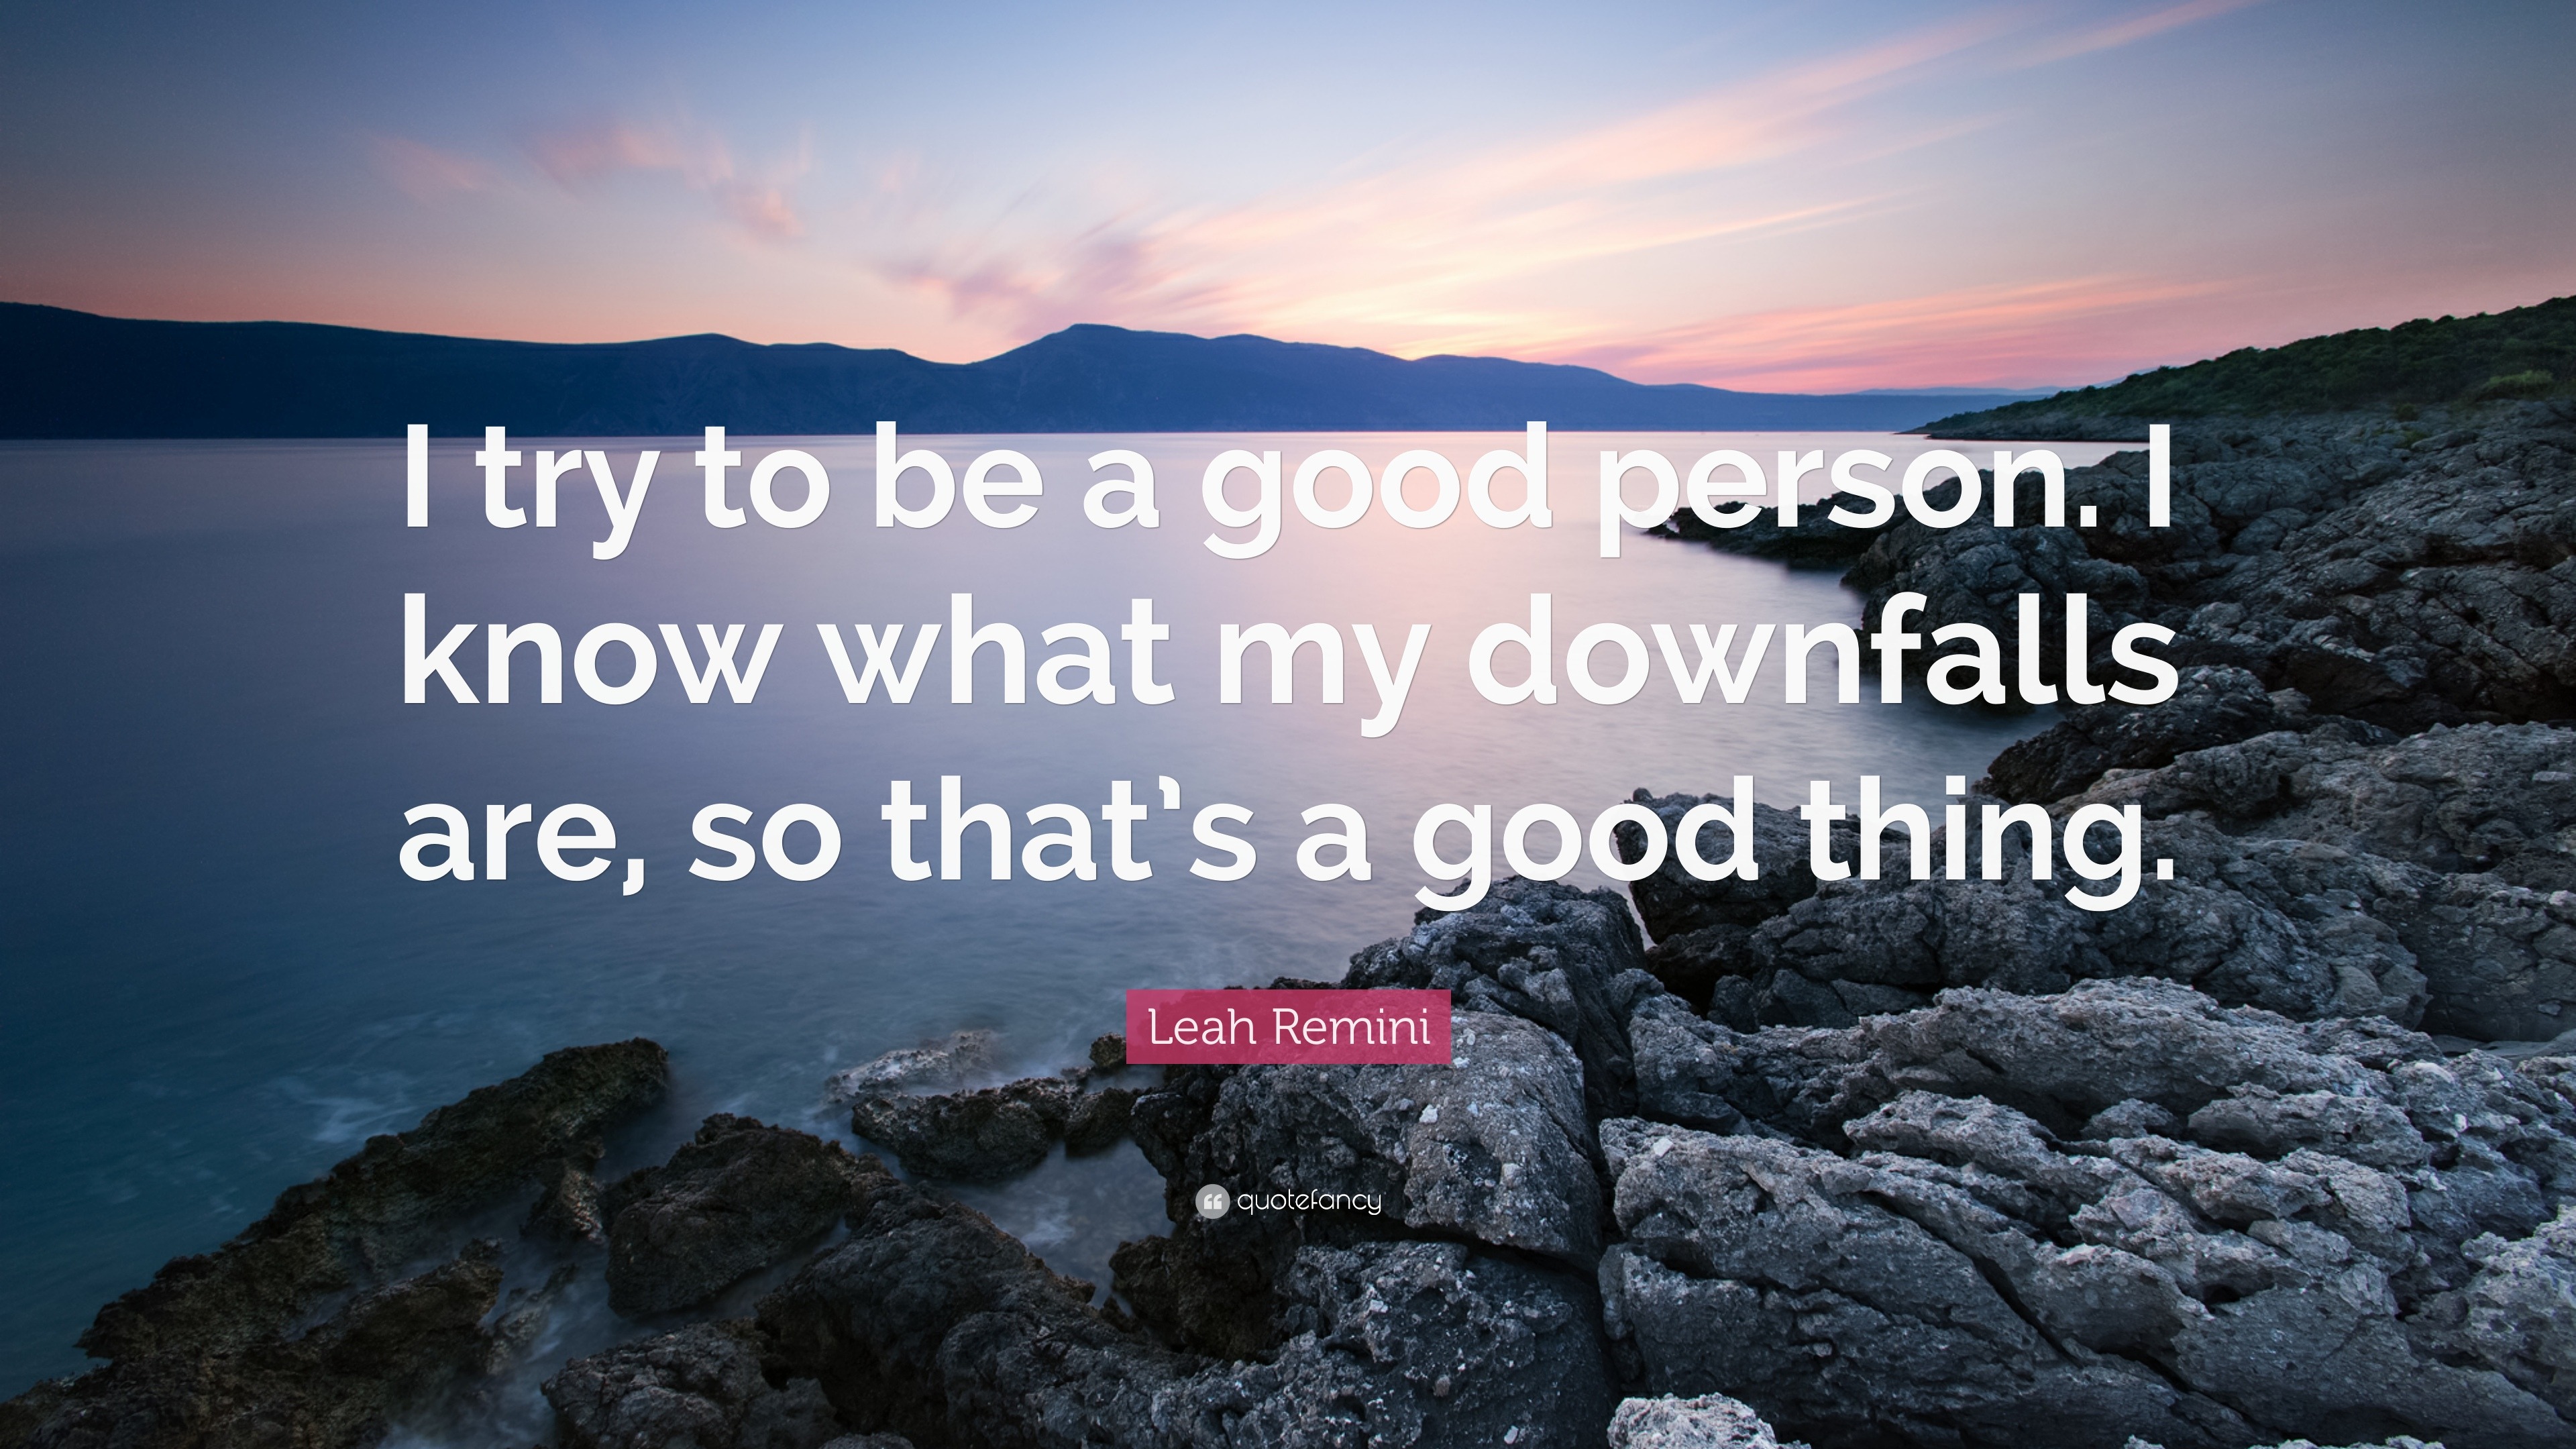 Leah Remini Quote: “I try to be a good person. I know what my downfalls ...